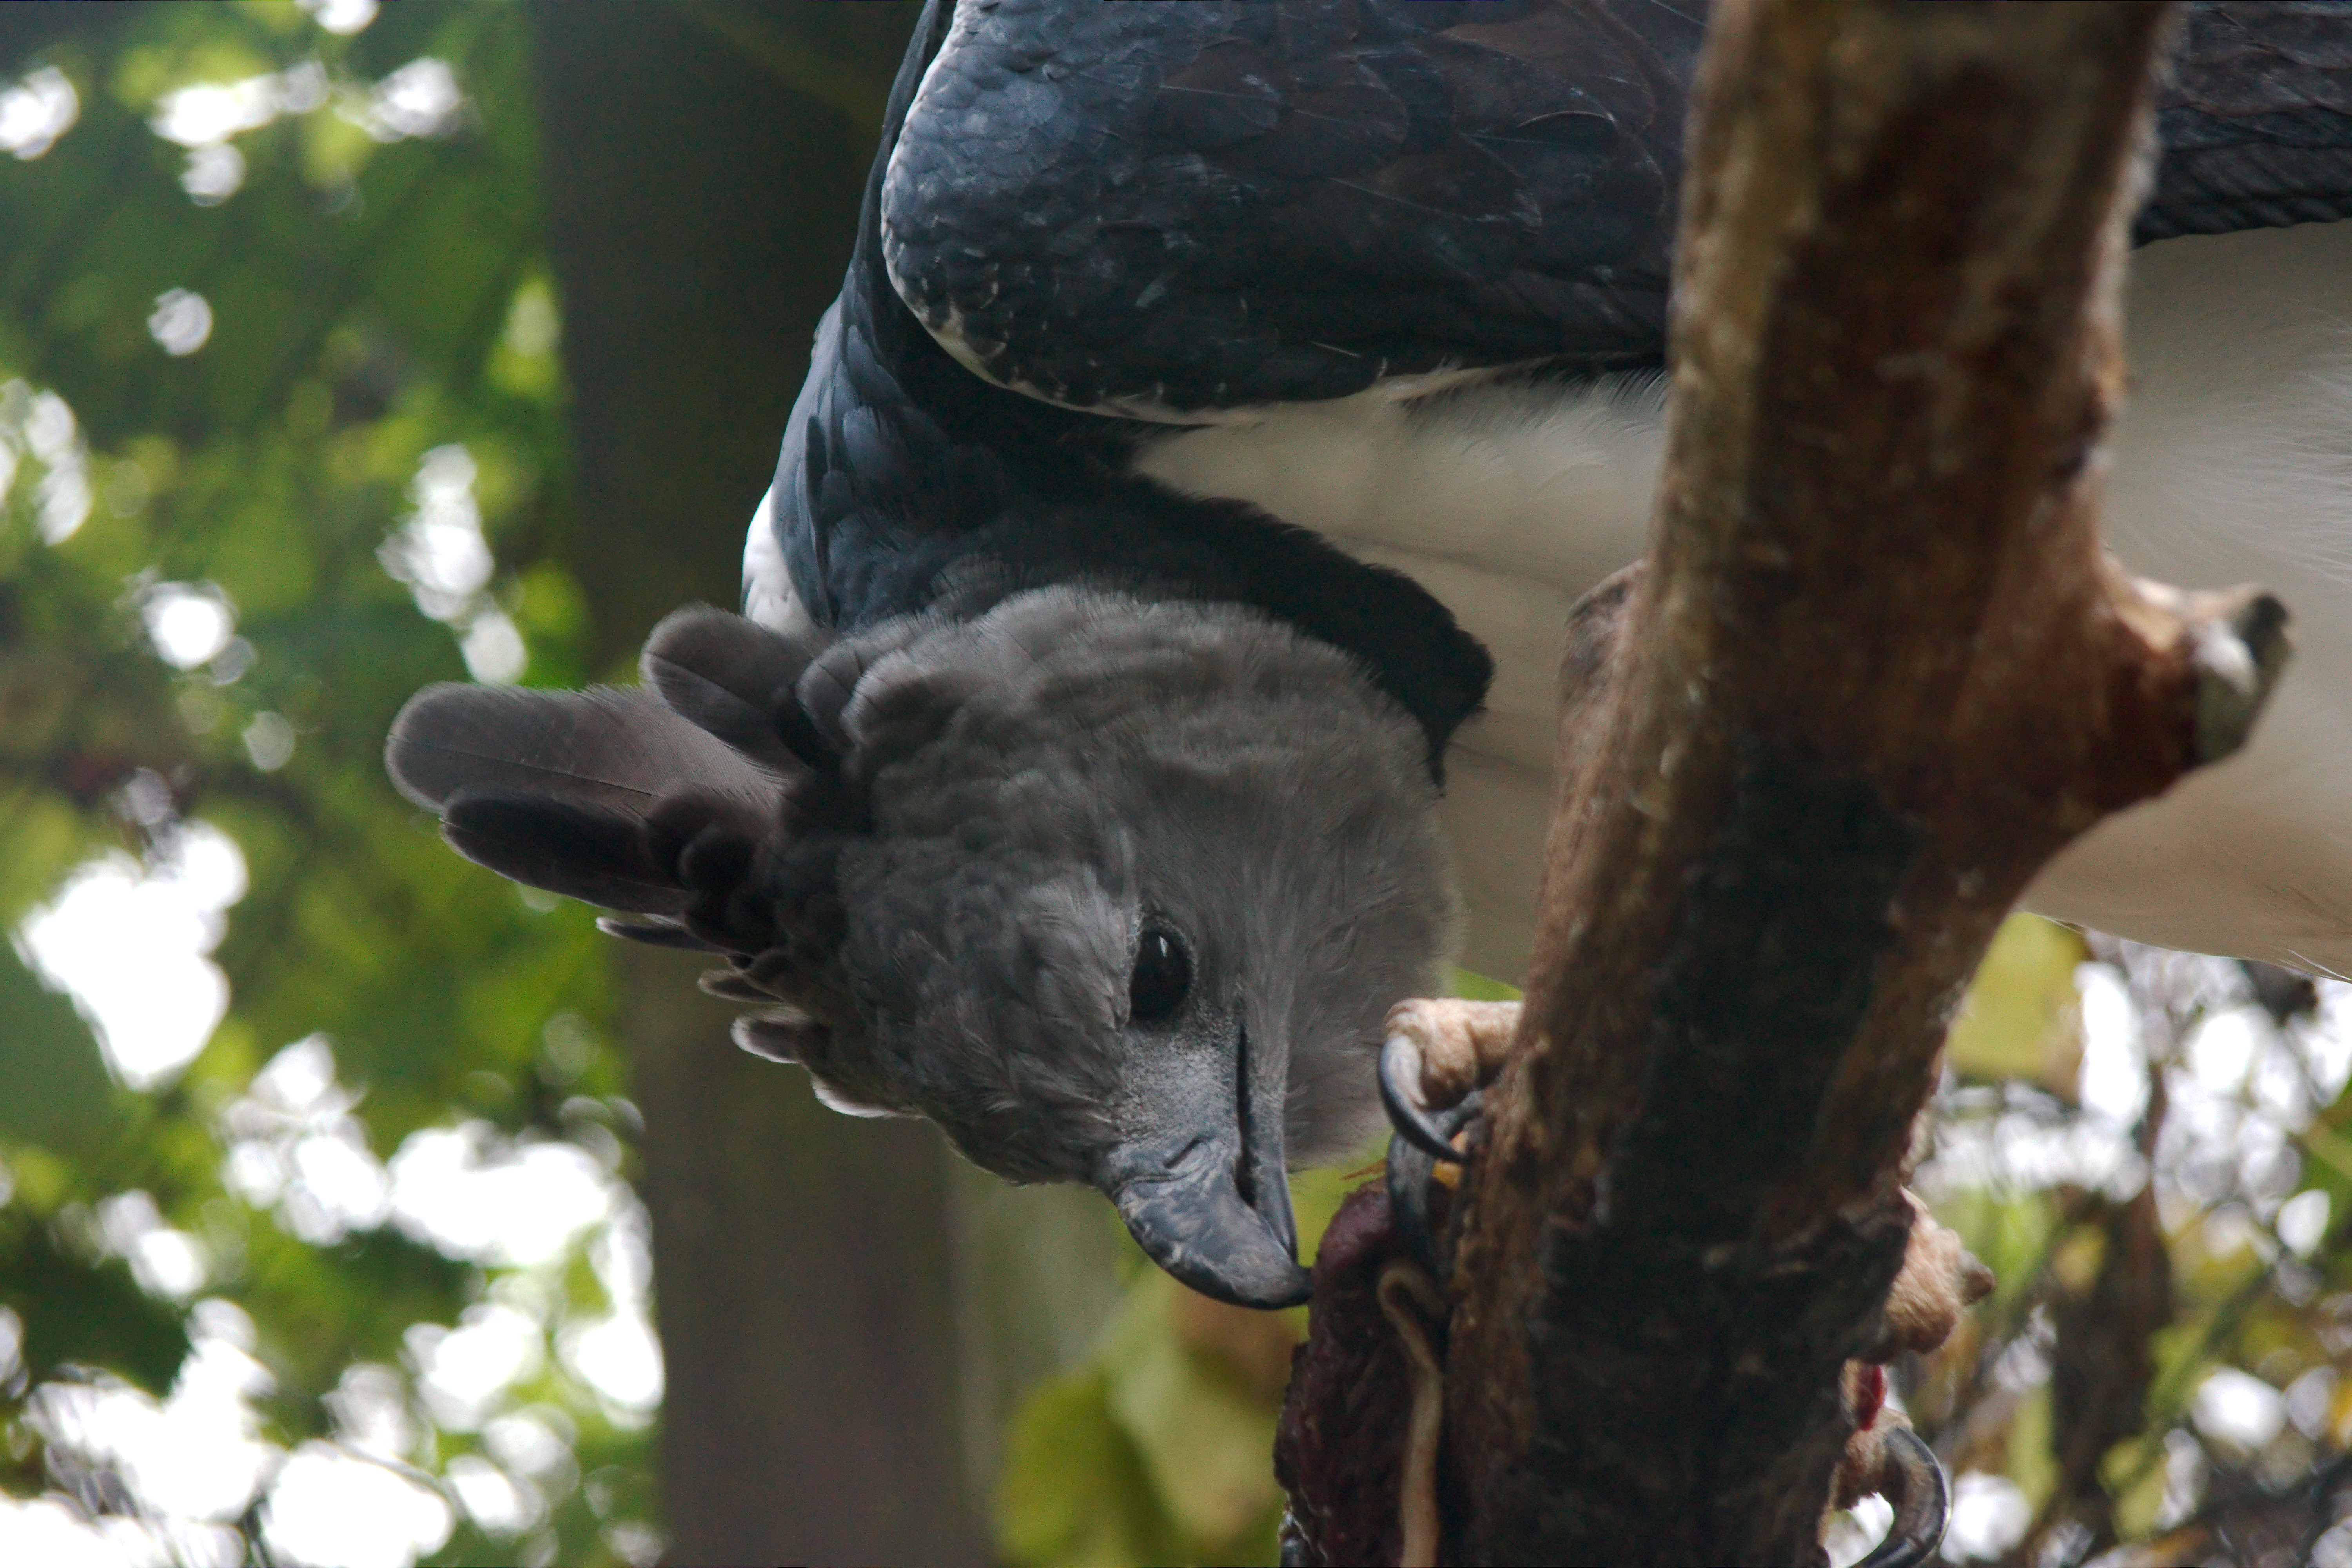 Crouching Harpy Eagle. Photo taken by Andy Rogers, published on Flickr